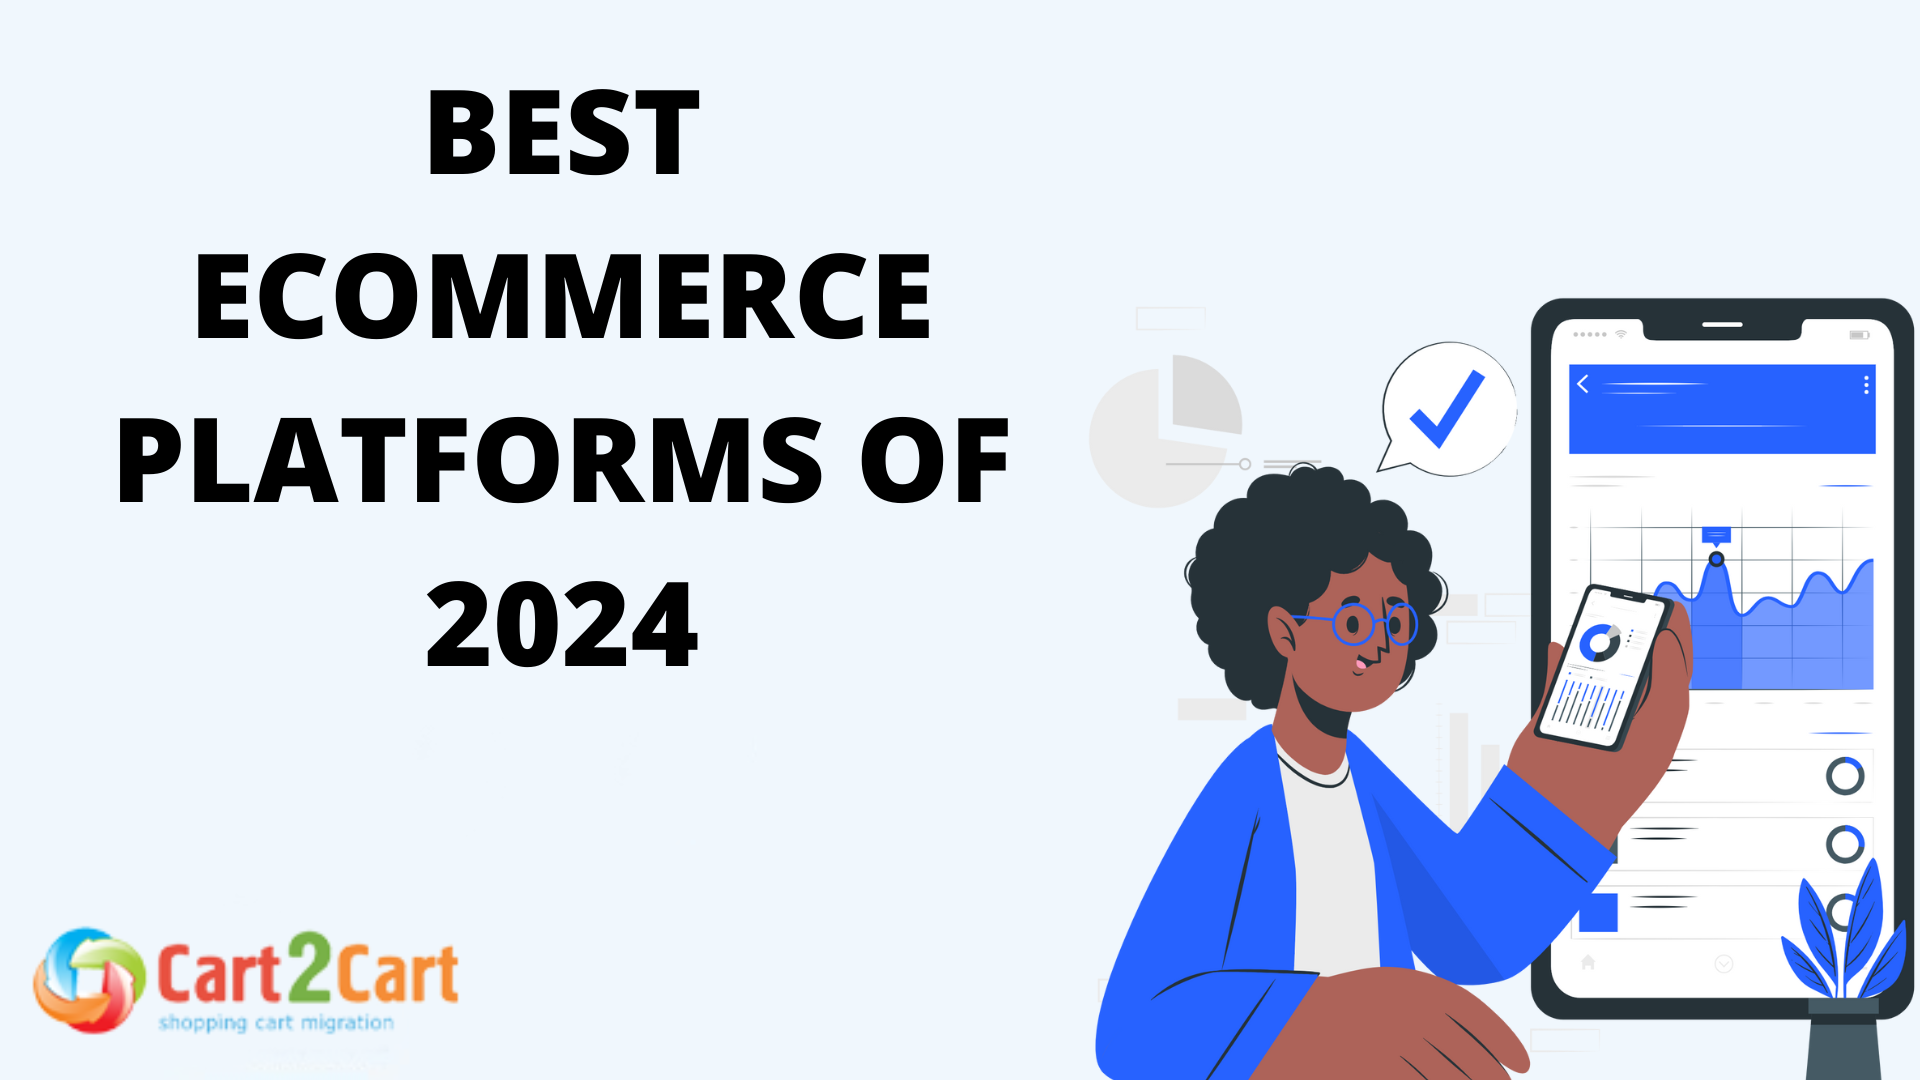 Best Ecommerce Platforms of 2024: 10 Great Picks for Businesses of All Sizes